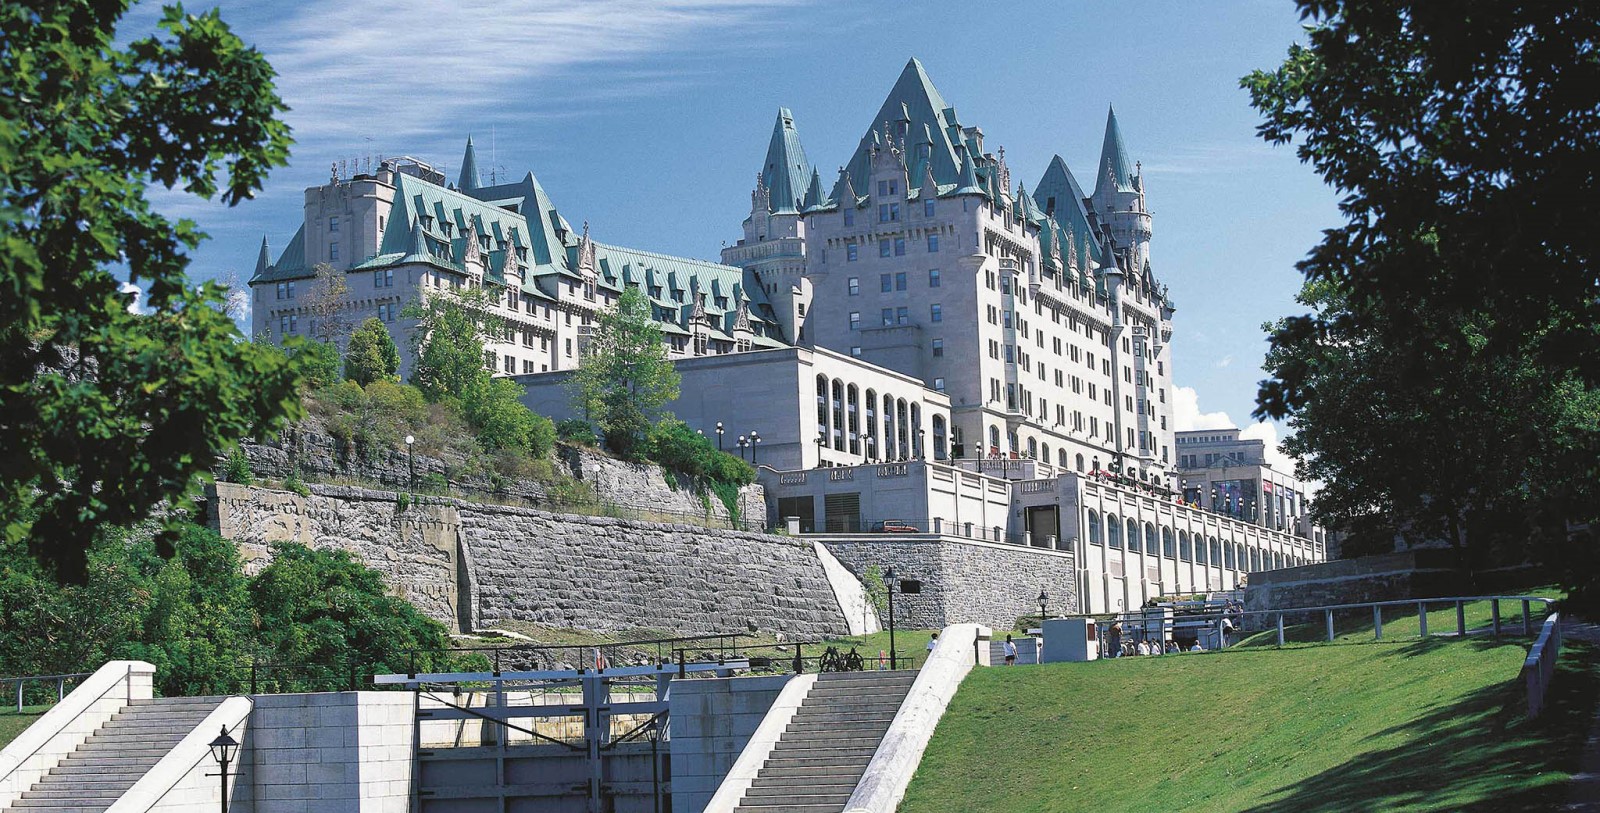 Image of hotel exterior Fairmont Château Laurier, 1912, Member of Historic Hotels Worldwide, in Ottowa, Canada, Overview